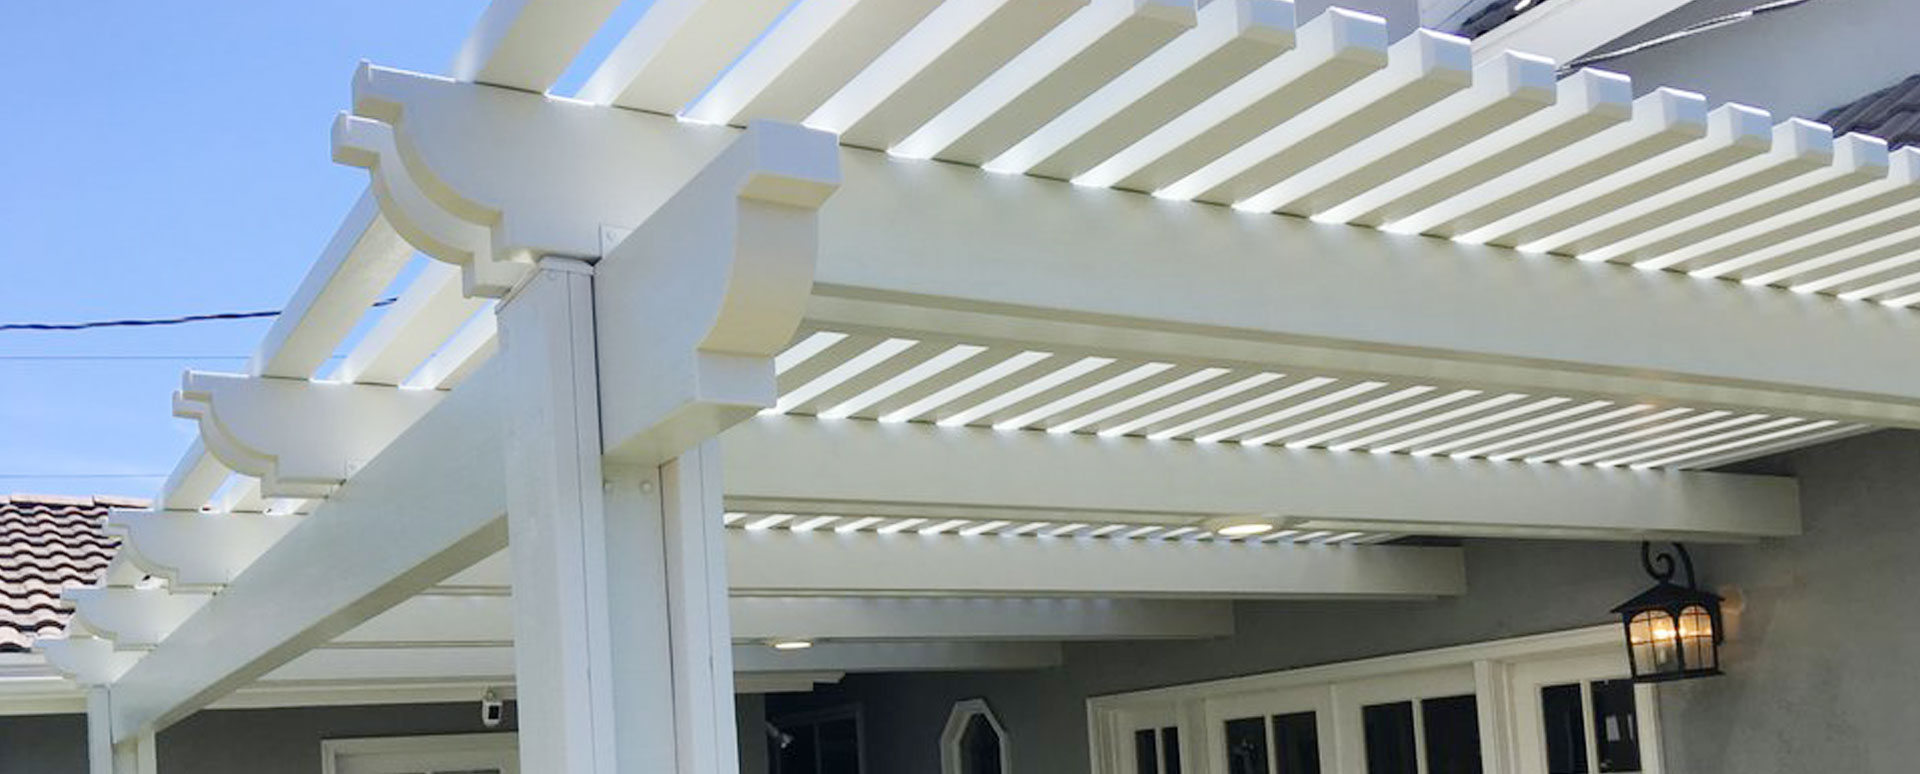 Alumawood Open Lattice Patio Covers Just Like New Patio Cover pertaining to proportions 1920 X 774